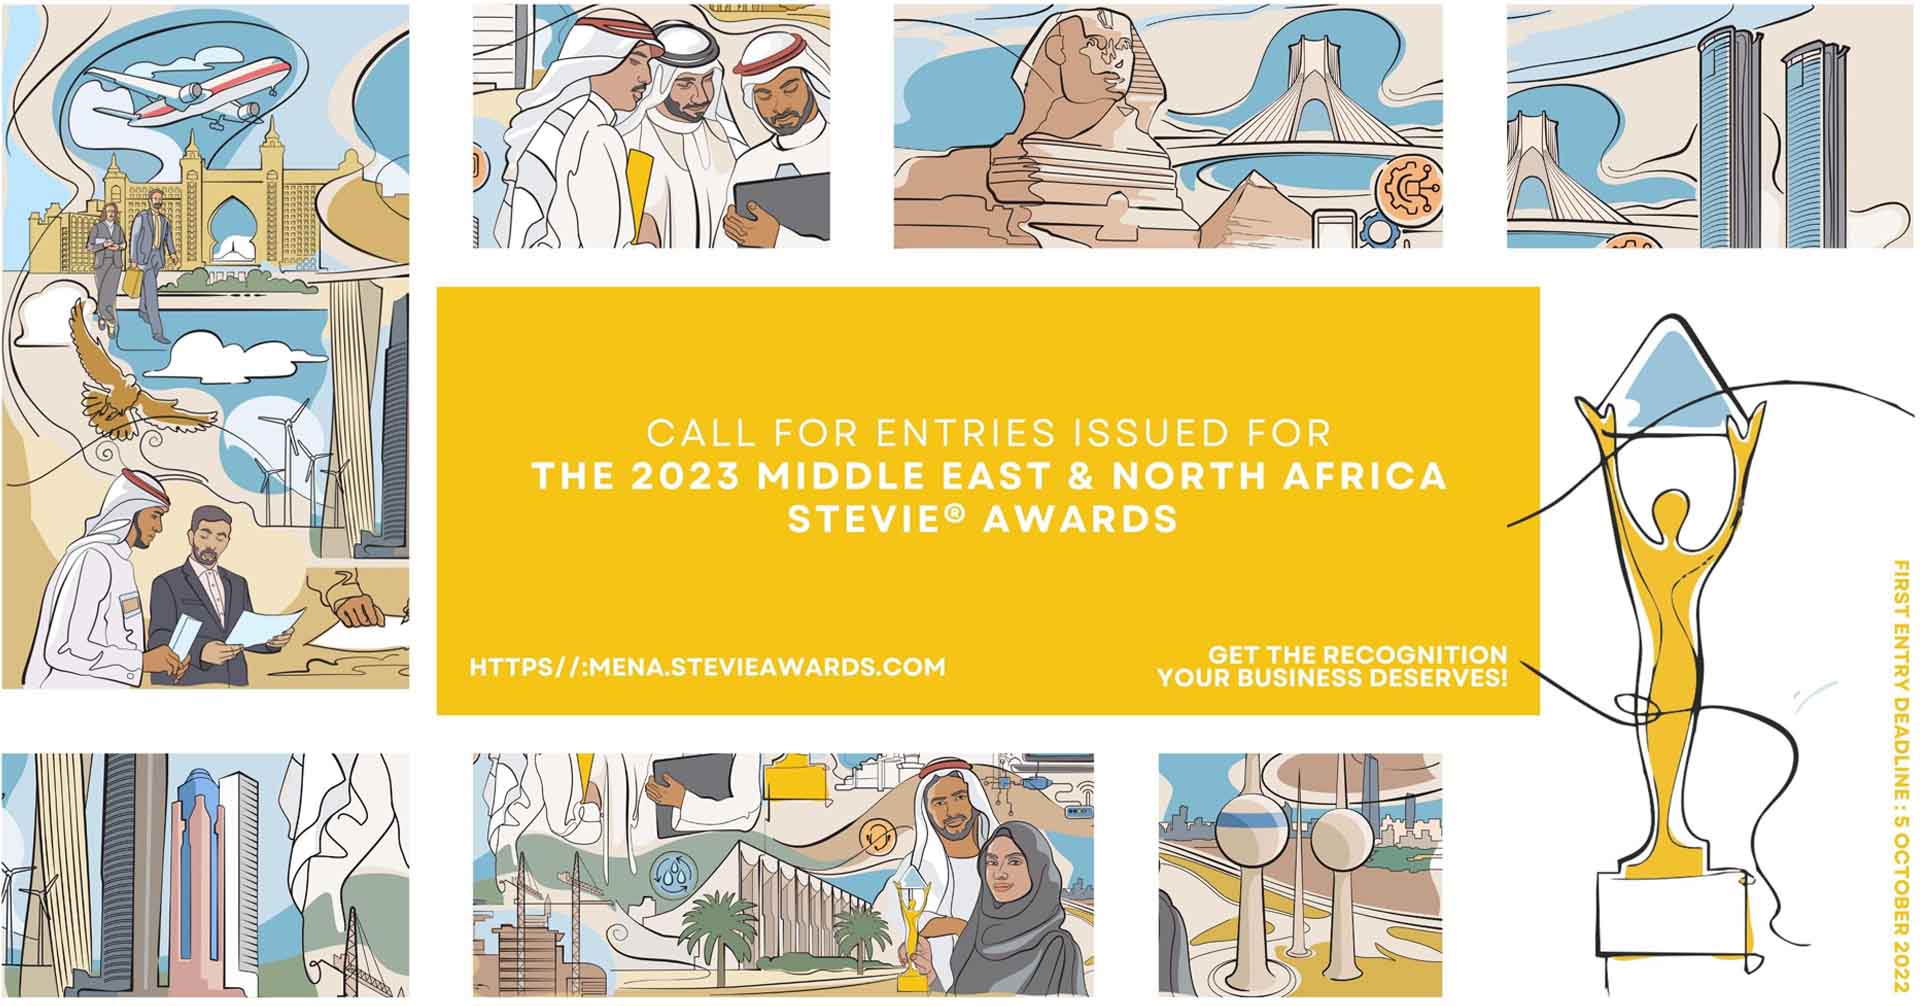 Call for entries issued for the 2023 Middle East & North Africa Stevie awards 